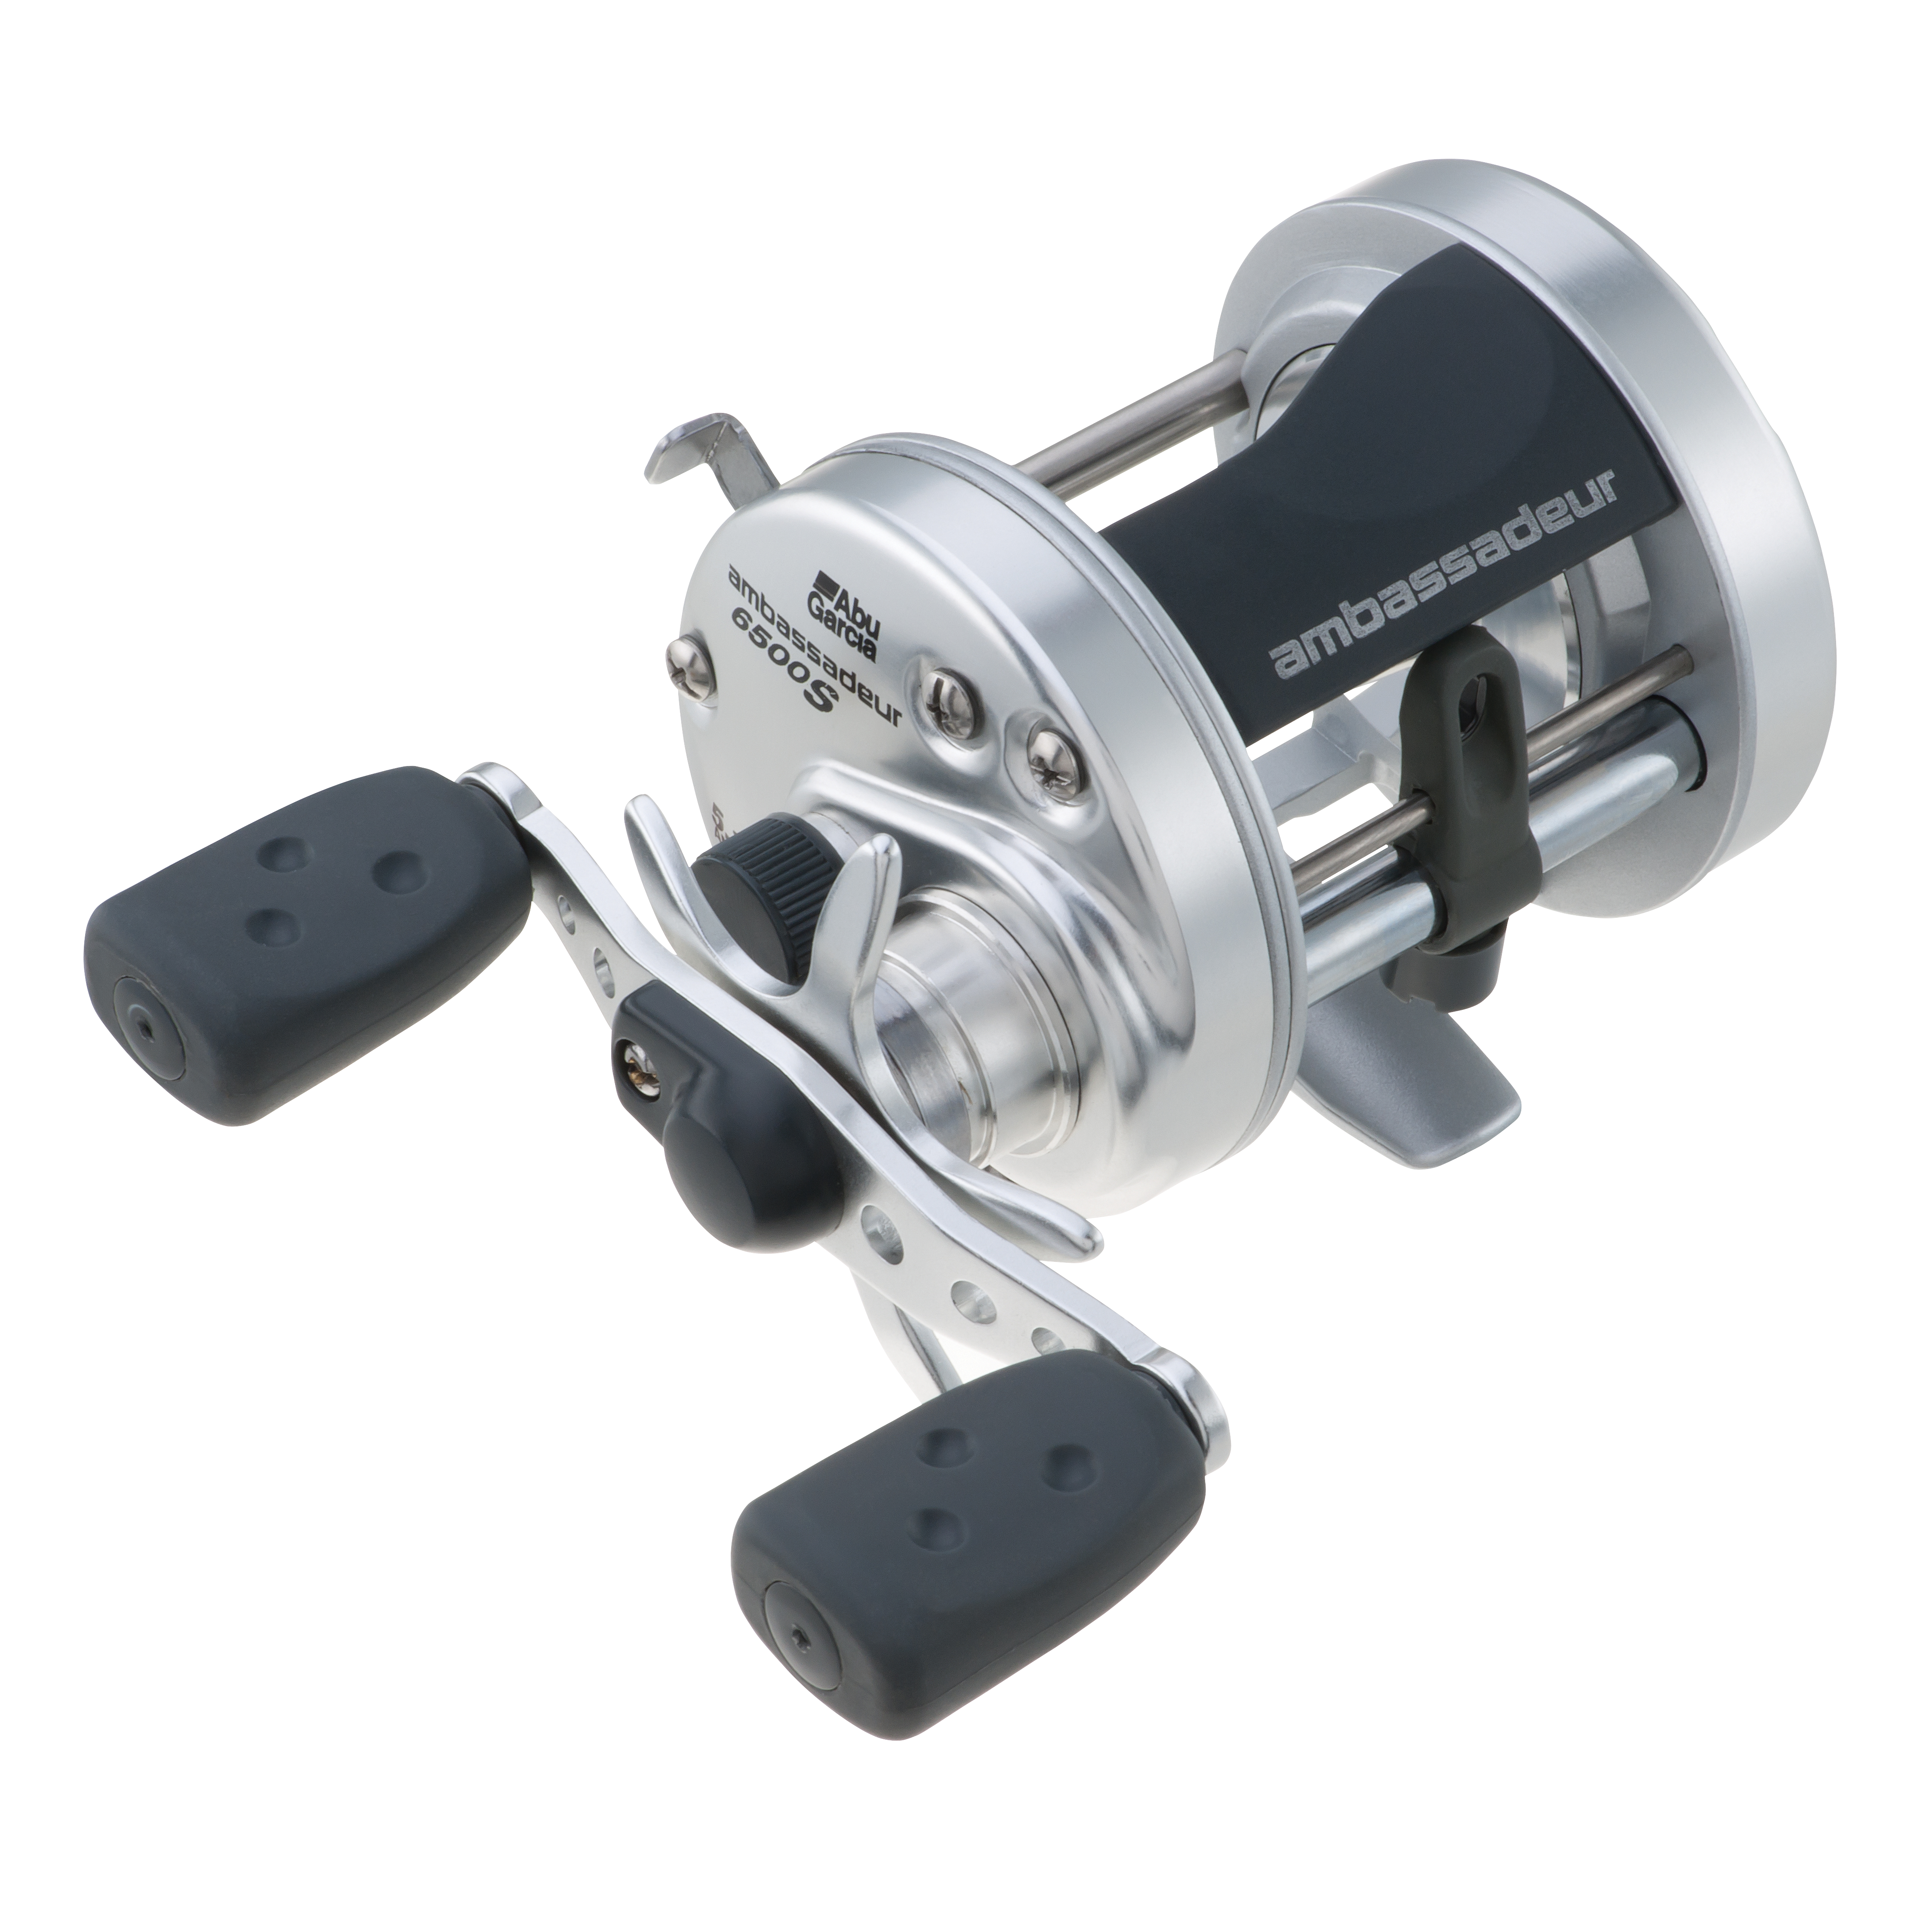 ABU GARCIA Level Wind Conventional Line Counter Righthanded Reel